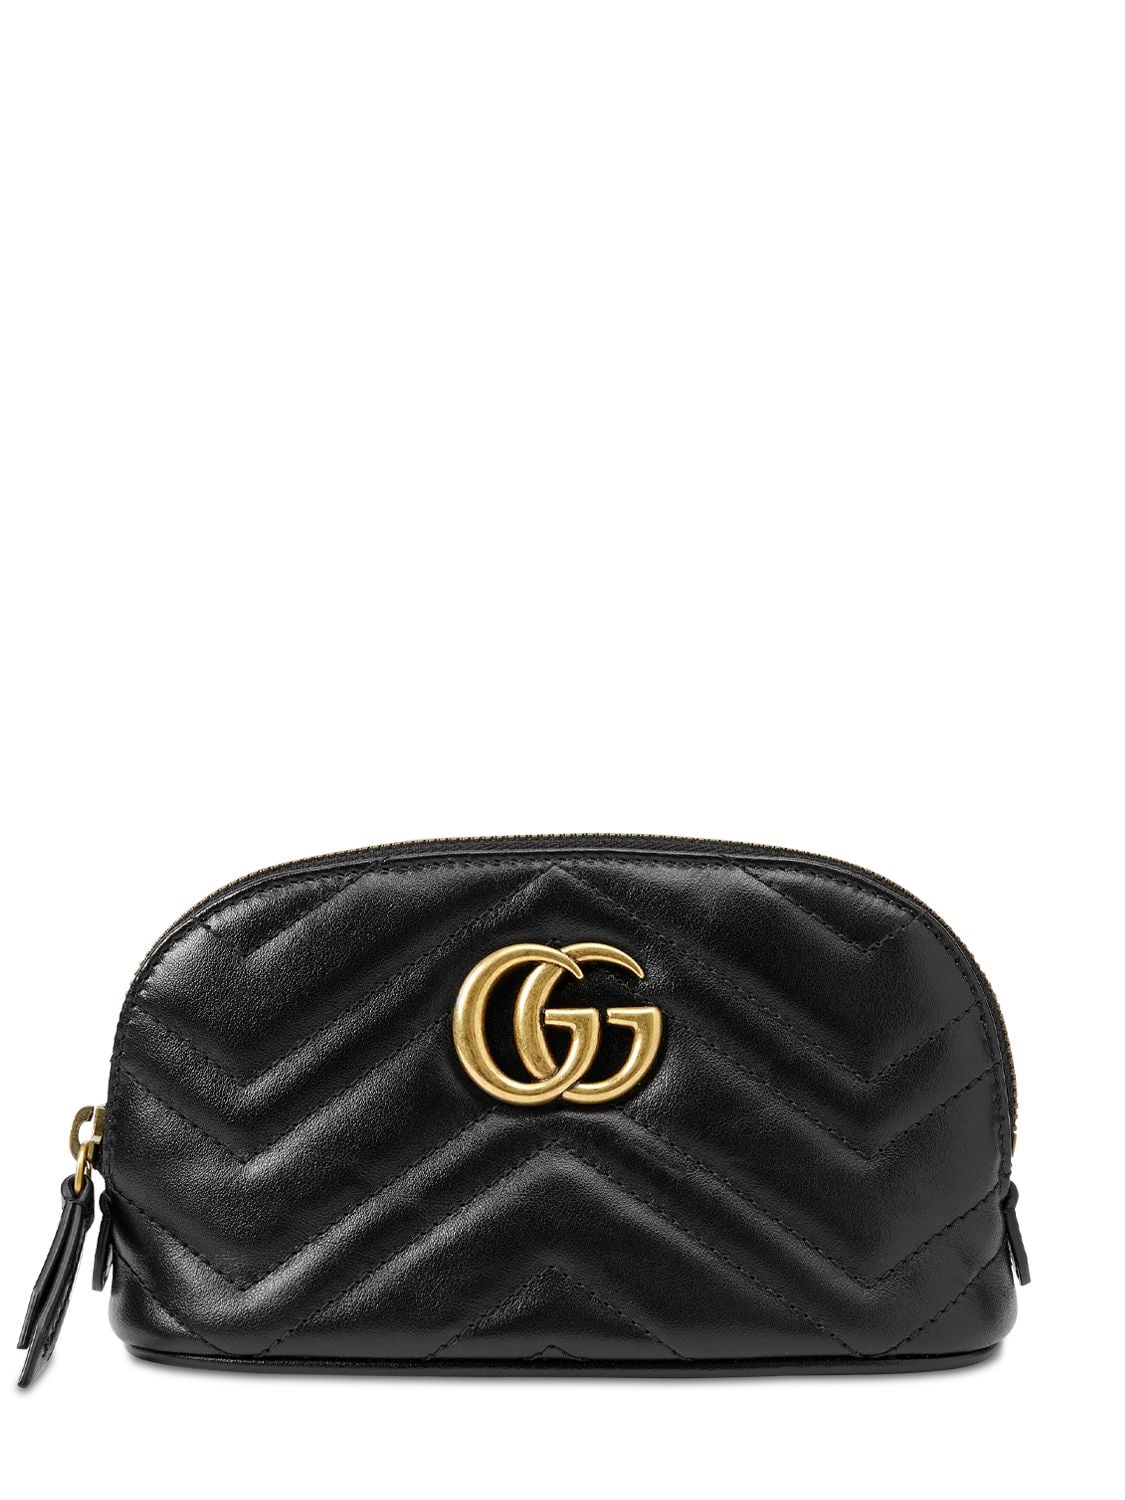 Gucci Small Gg Marmont Leather Beauty Bag In Black